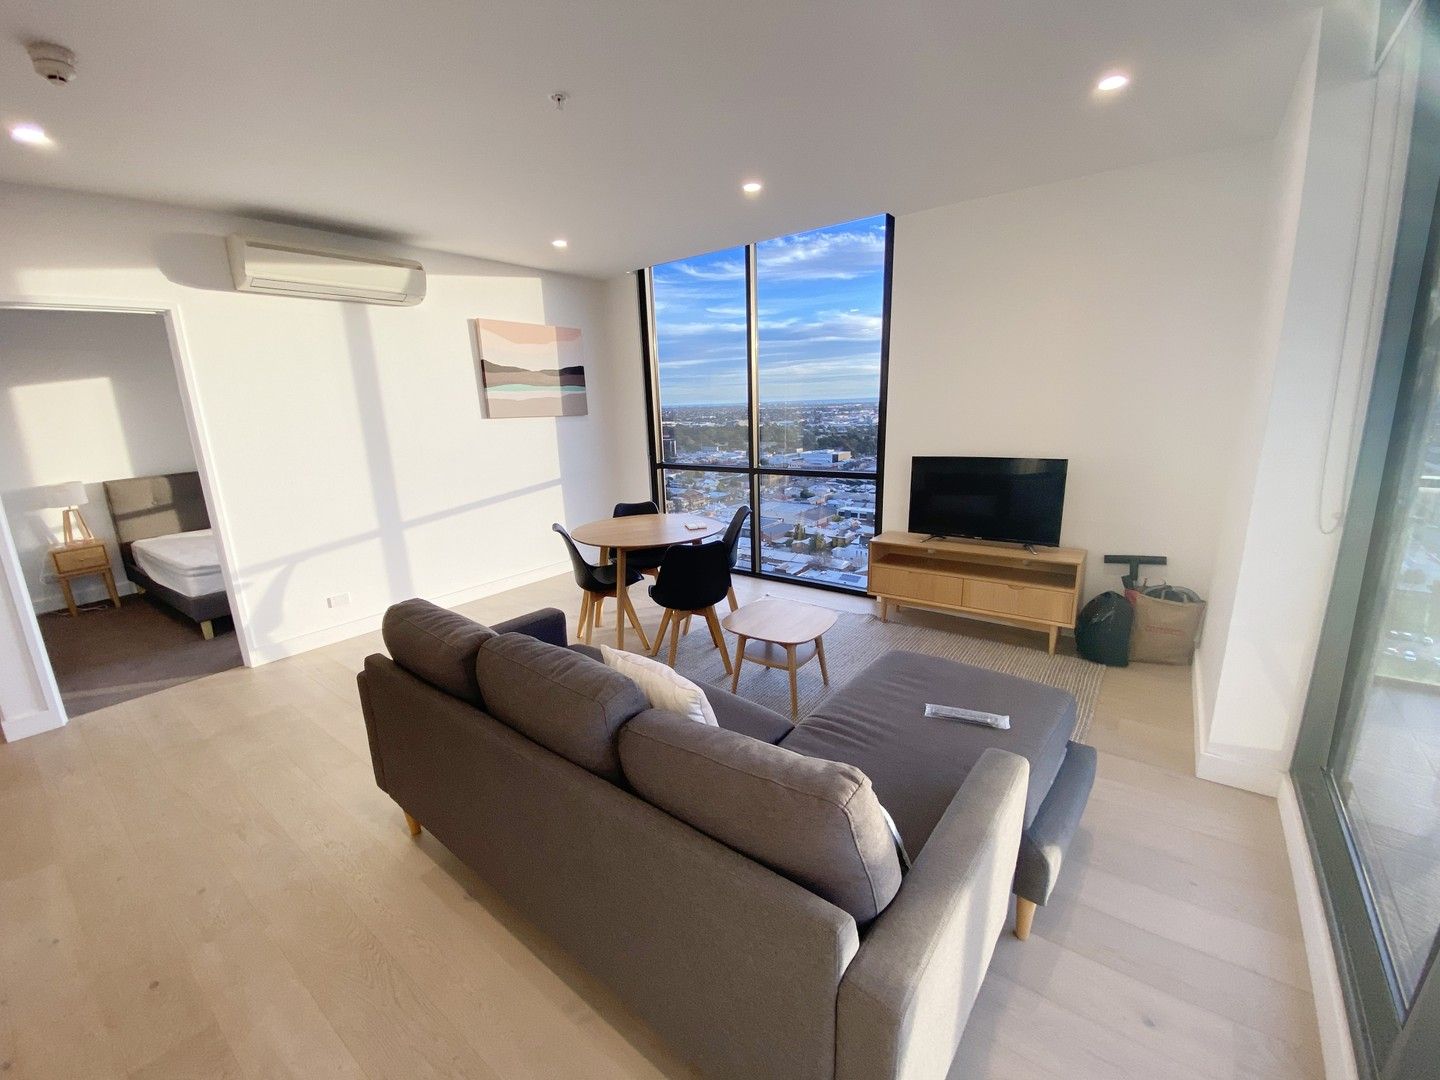 2 bedrooms Apartment / Unit / Flat in 2001/156 Wright Street ADELAIDE SA, 5000